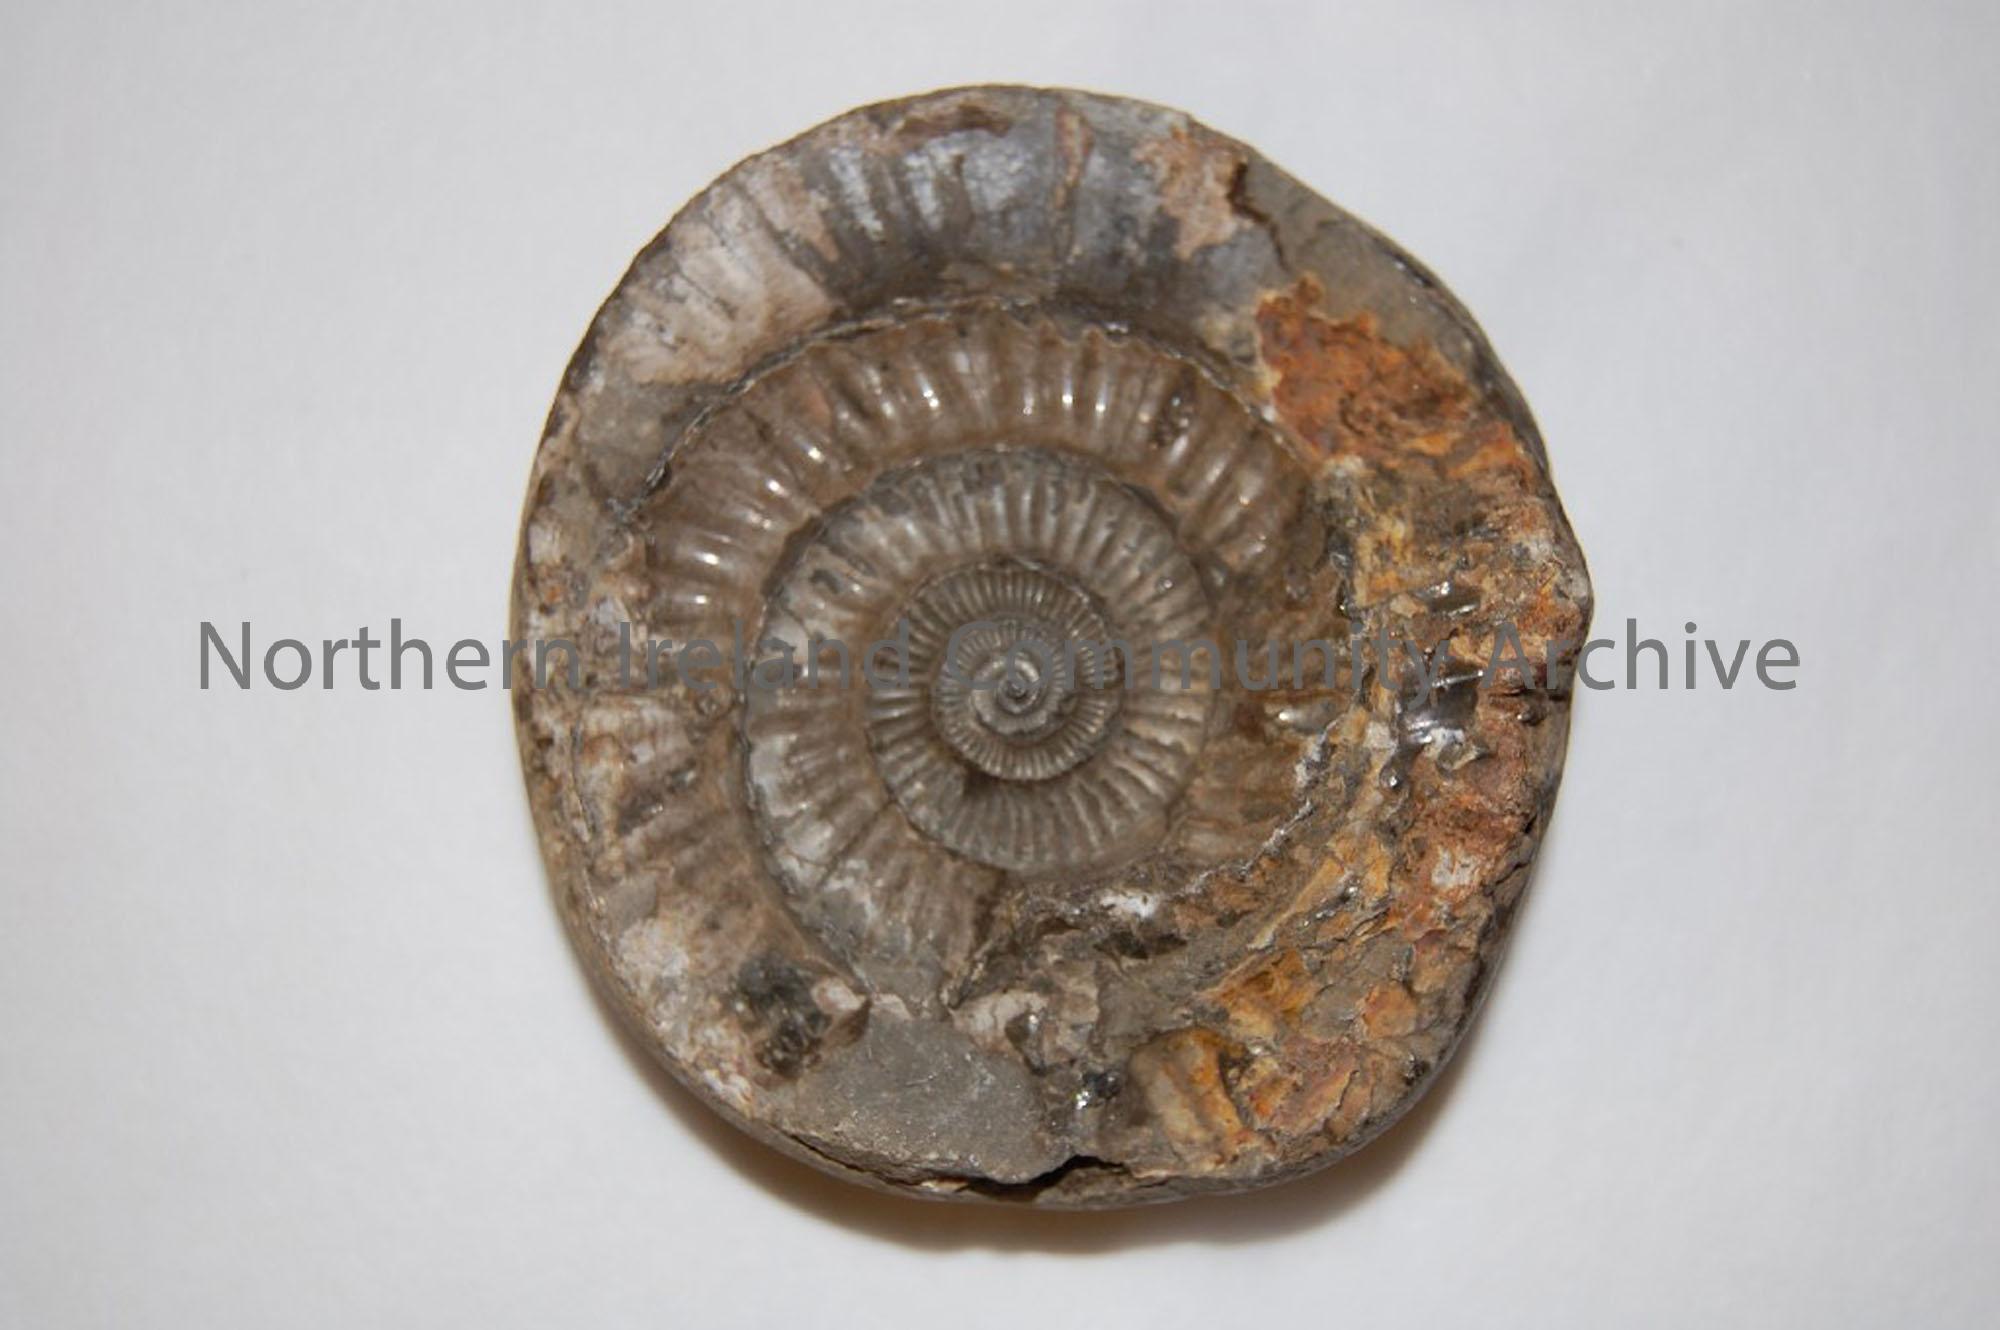 very finely preserved fossilised impression of ammonite